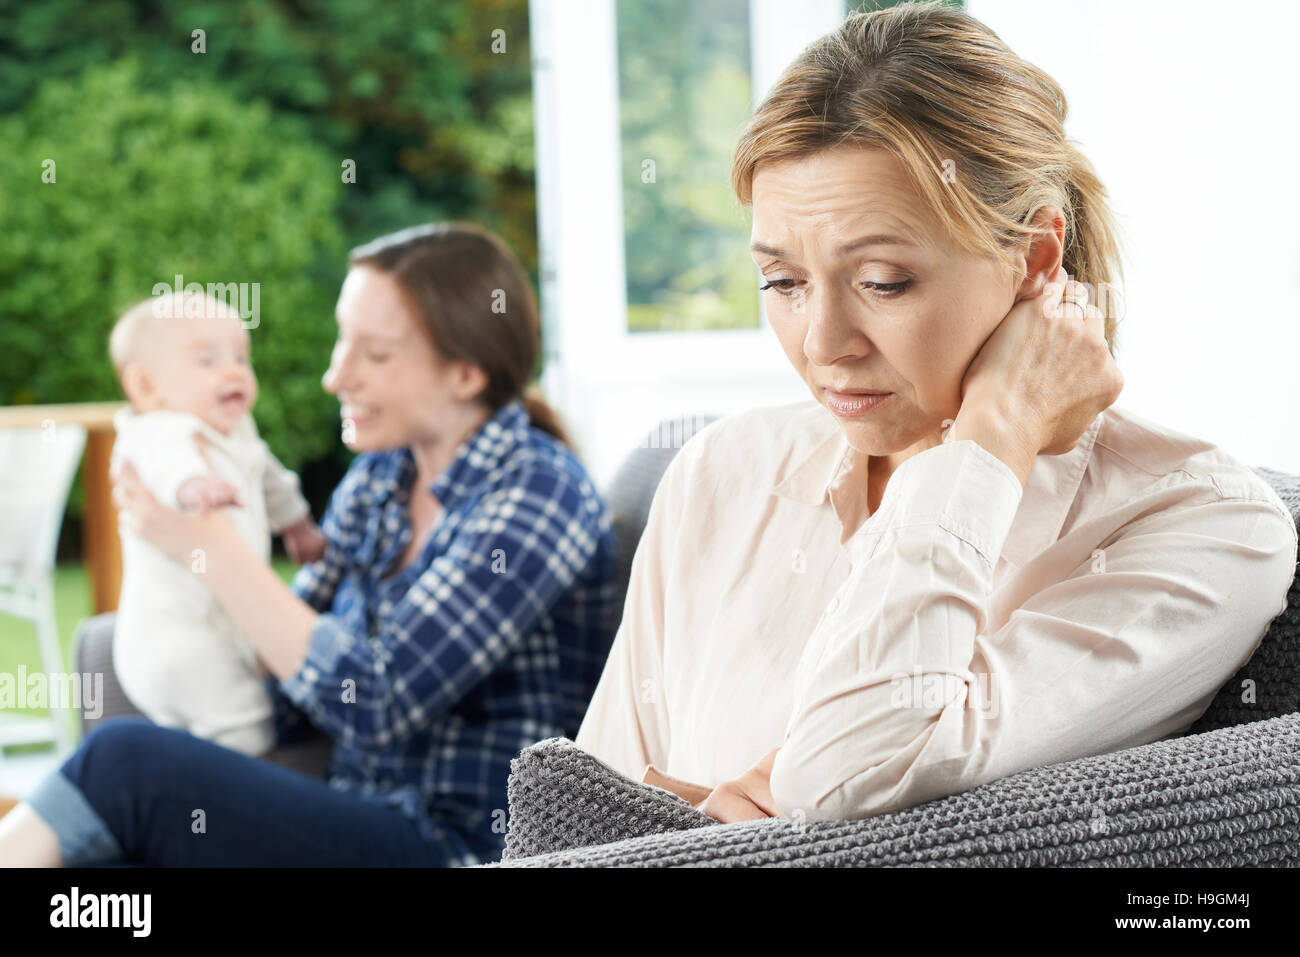 Sad Mature Woman Jealous Of Mother With Young Baby Stock Photo